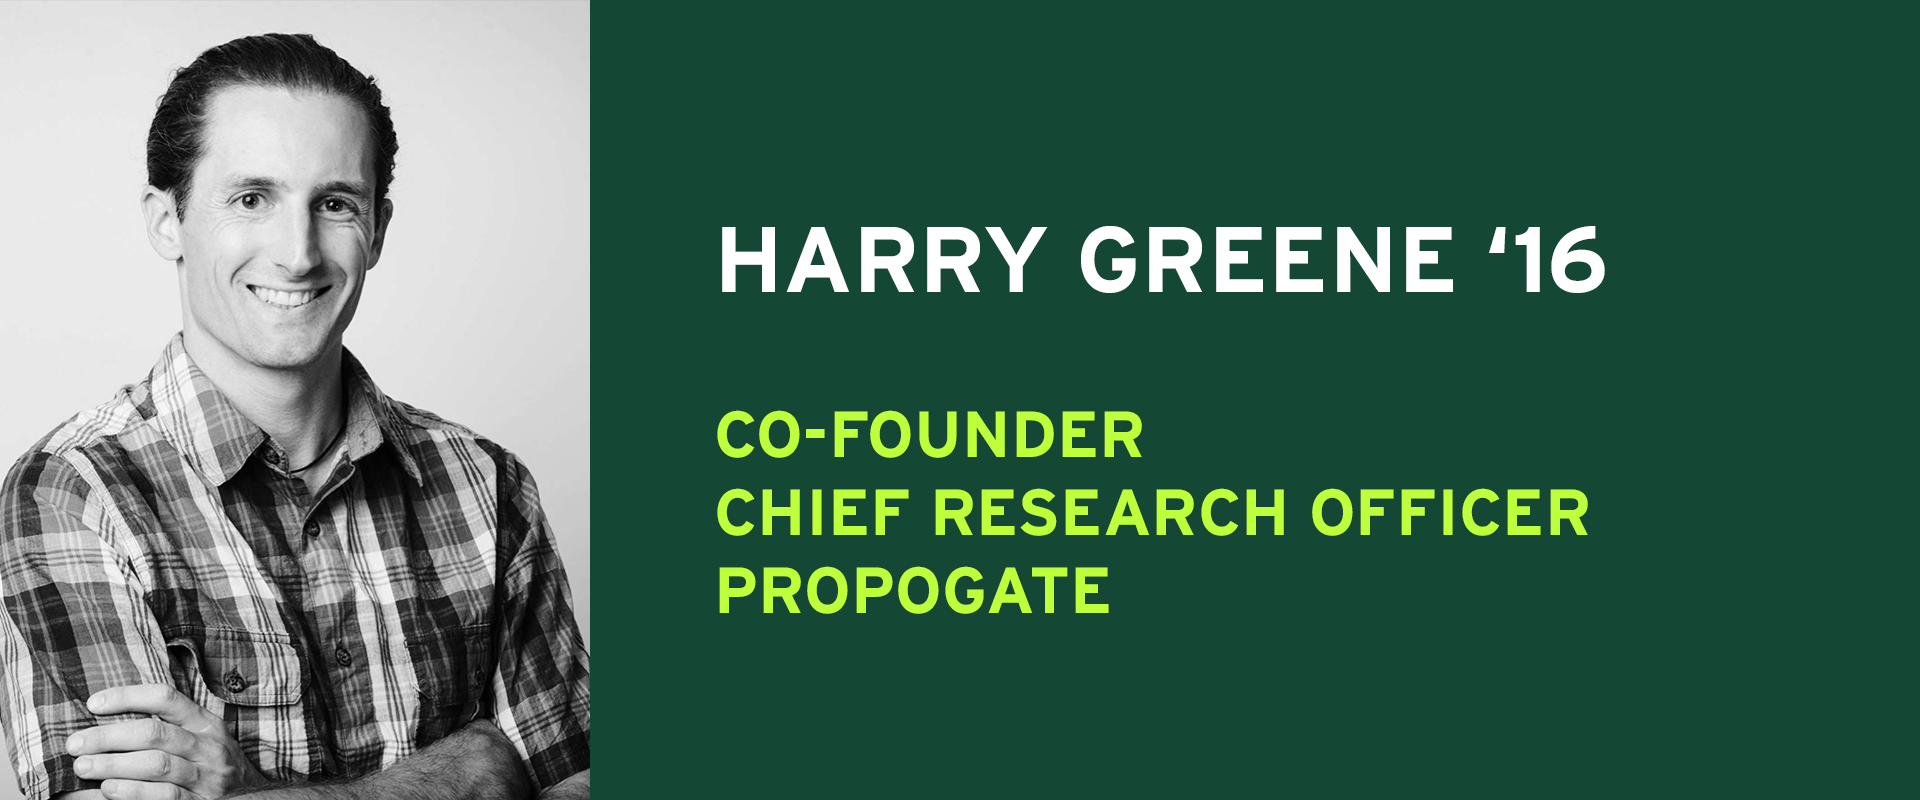 Harry Greene '16 Co-Founder Chief Research Officer Propogate